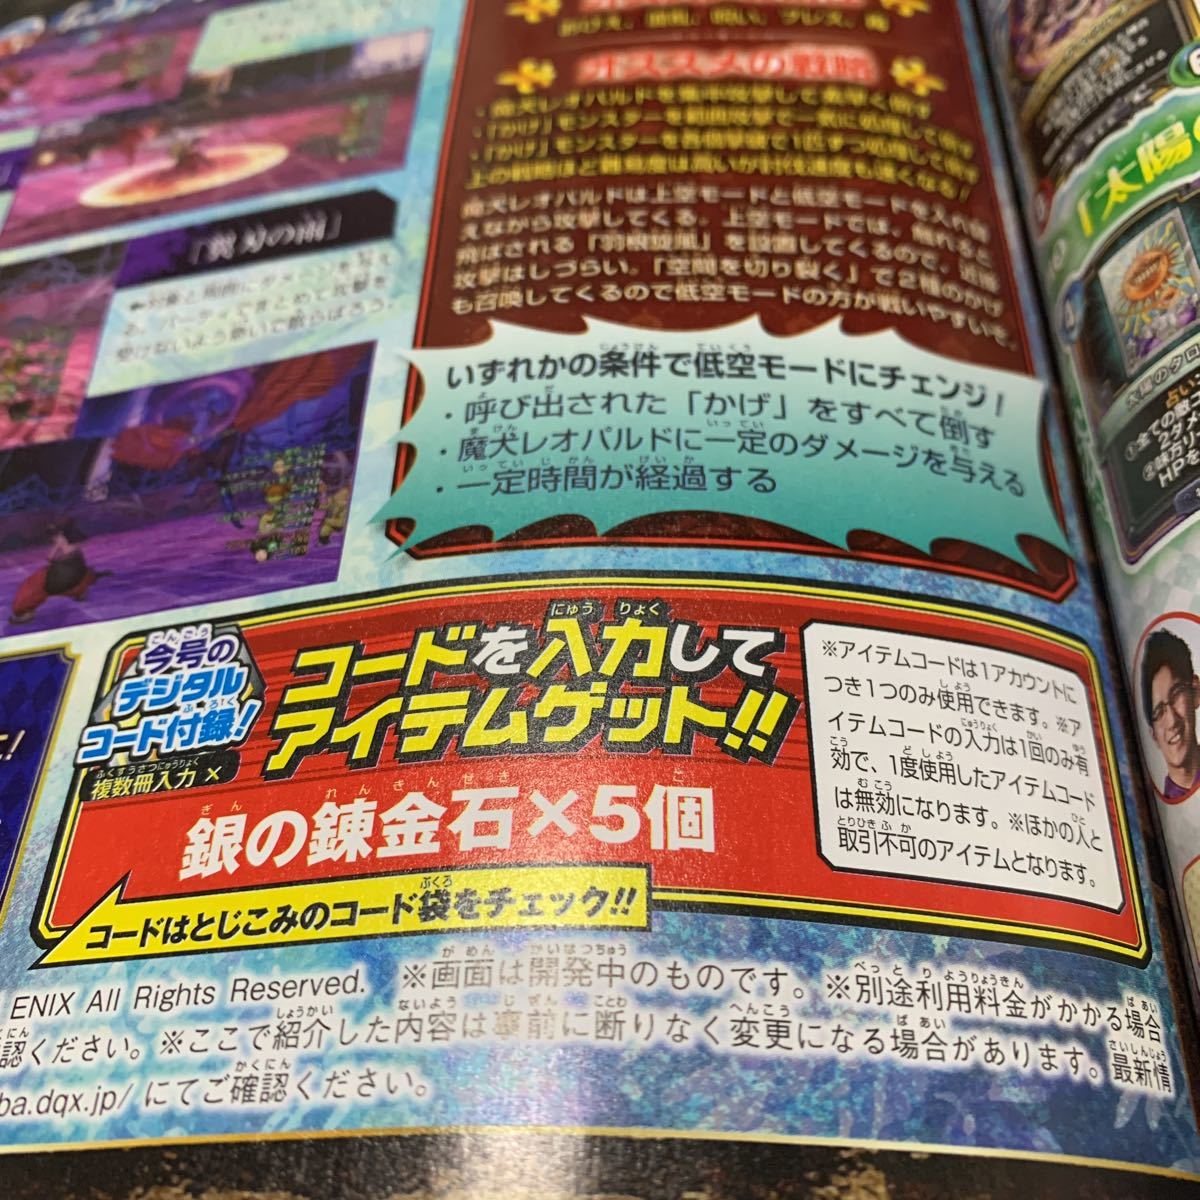 V Jump 9 month number serial code Dragon Quest X online 